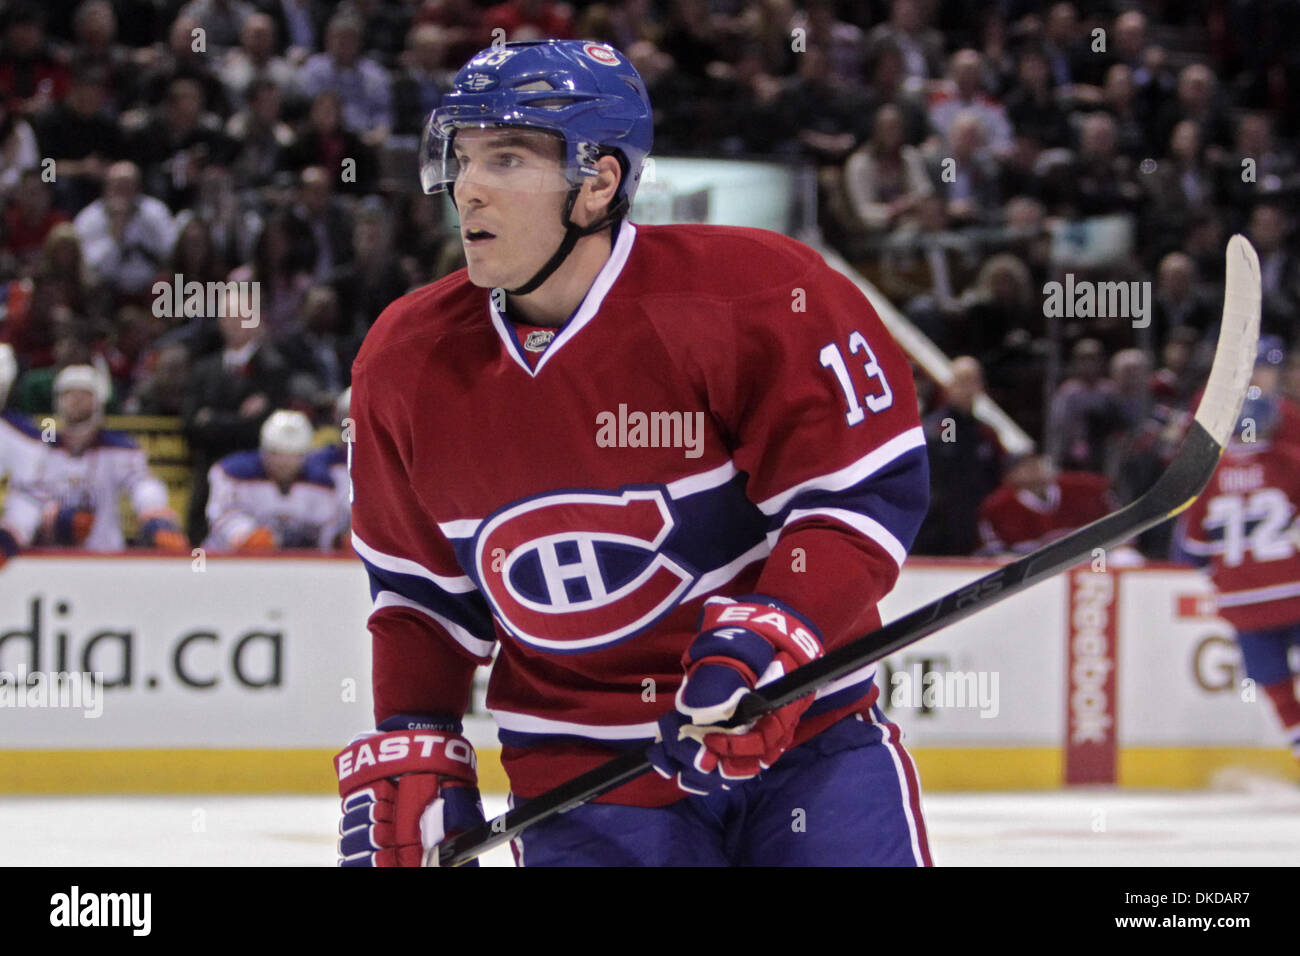 Nov. 8, 2011 - Montreal, Quebec, Canada - Montreal Canadiens forward Michael Cammalleri(13) in first period action during the Montreal Canadiens' game against the Edmonton Oilers at Bell Center. After one period the game is scoreless. (Credit Image: © Phillippe Champoux/Southcreek/ZUMAPRESS.com) Stock Photo